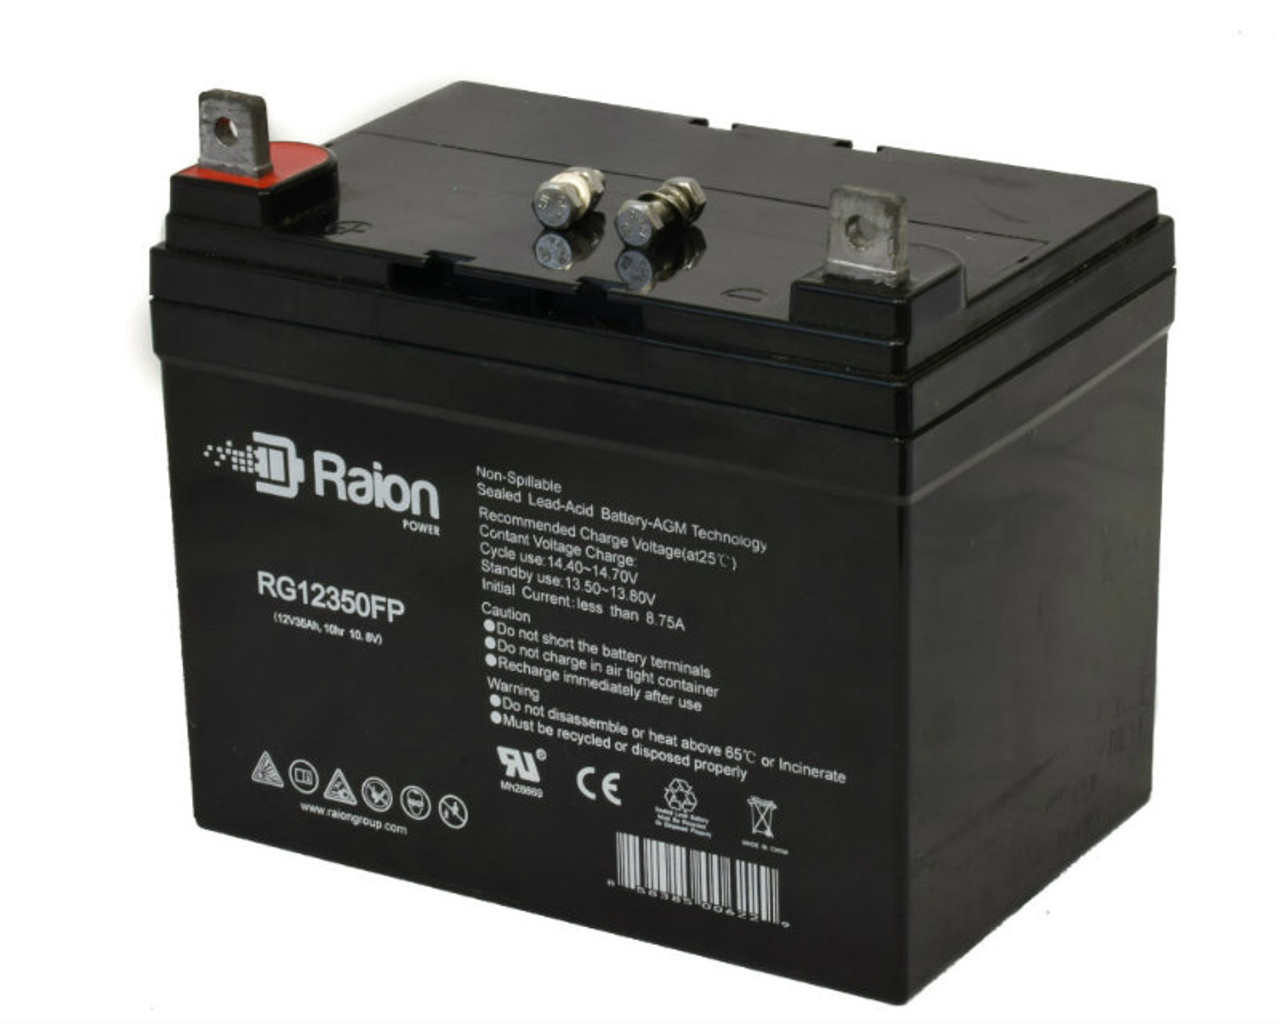 Raion Power Replacement 12V 35Ah RG12350FP Battery for Cellpower CPL 33-12